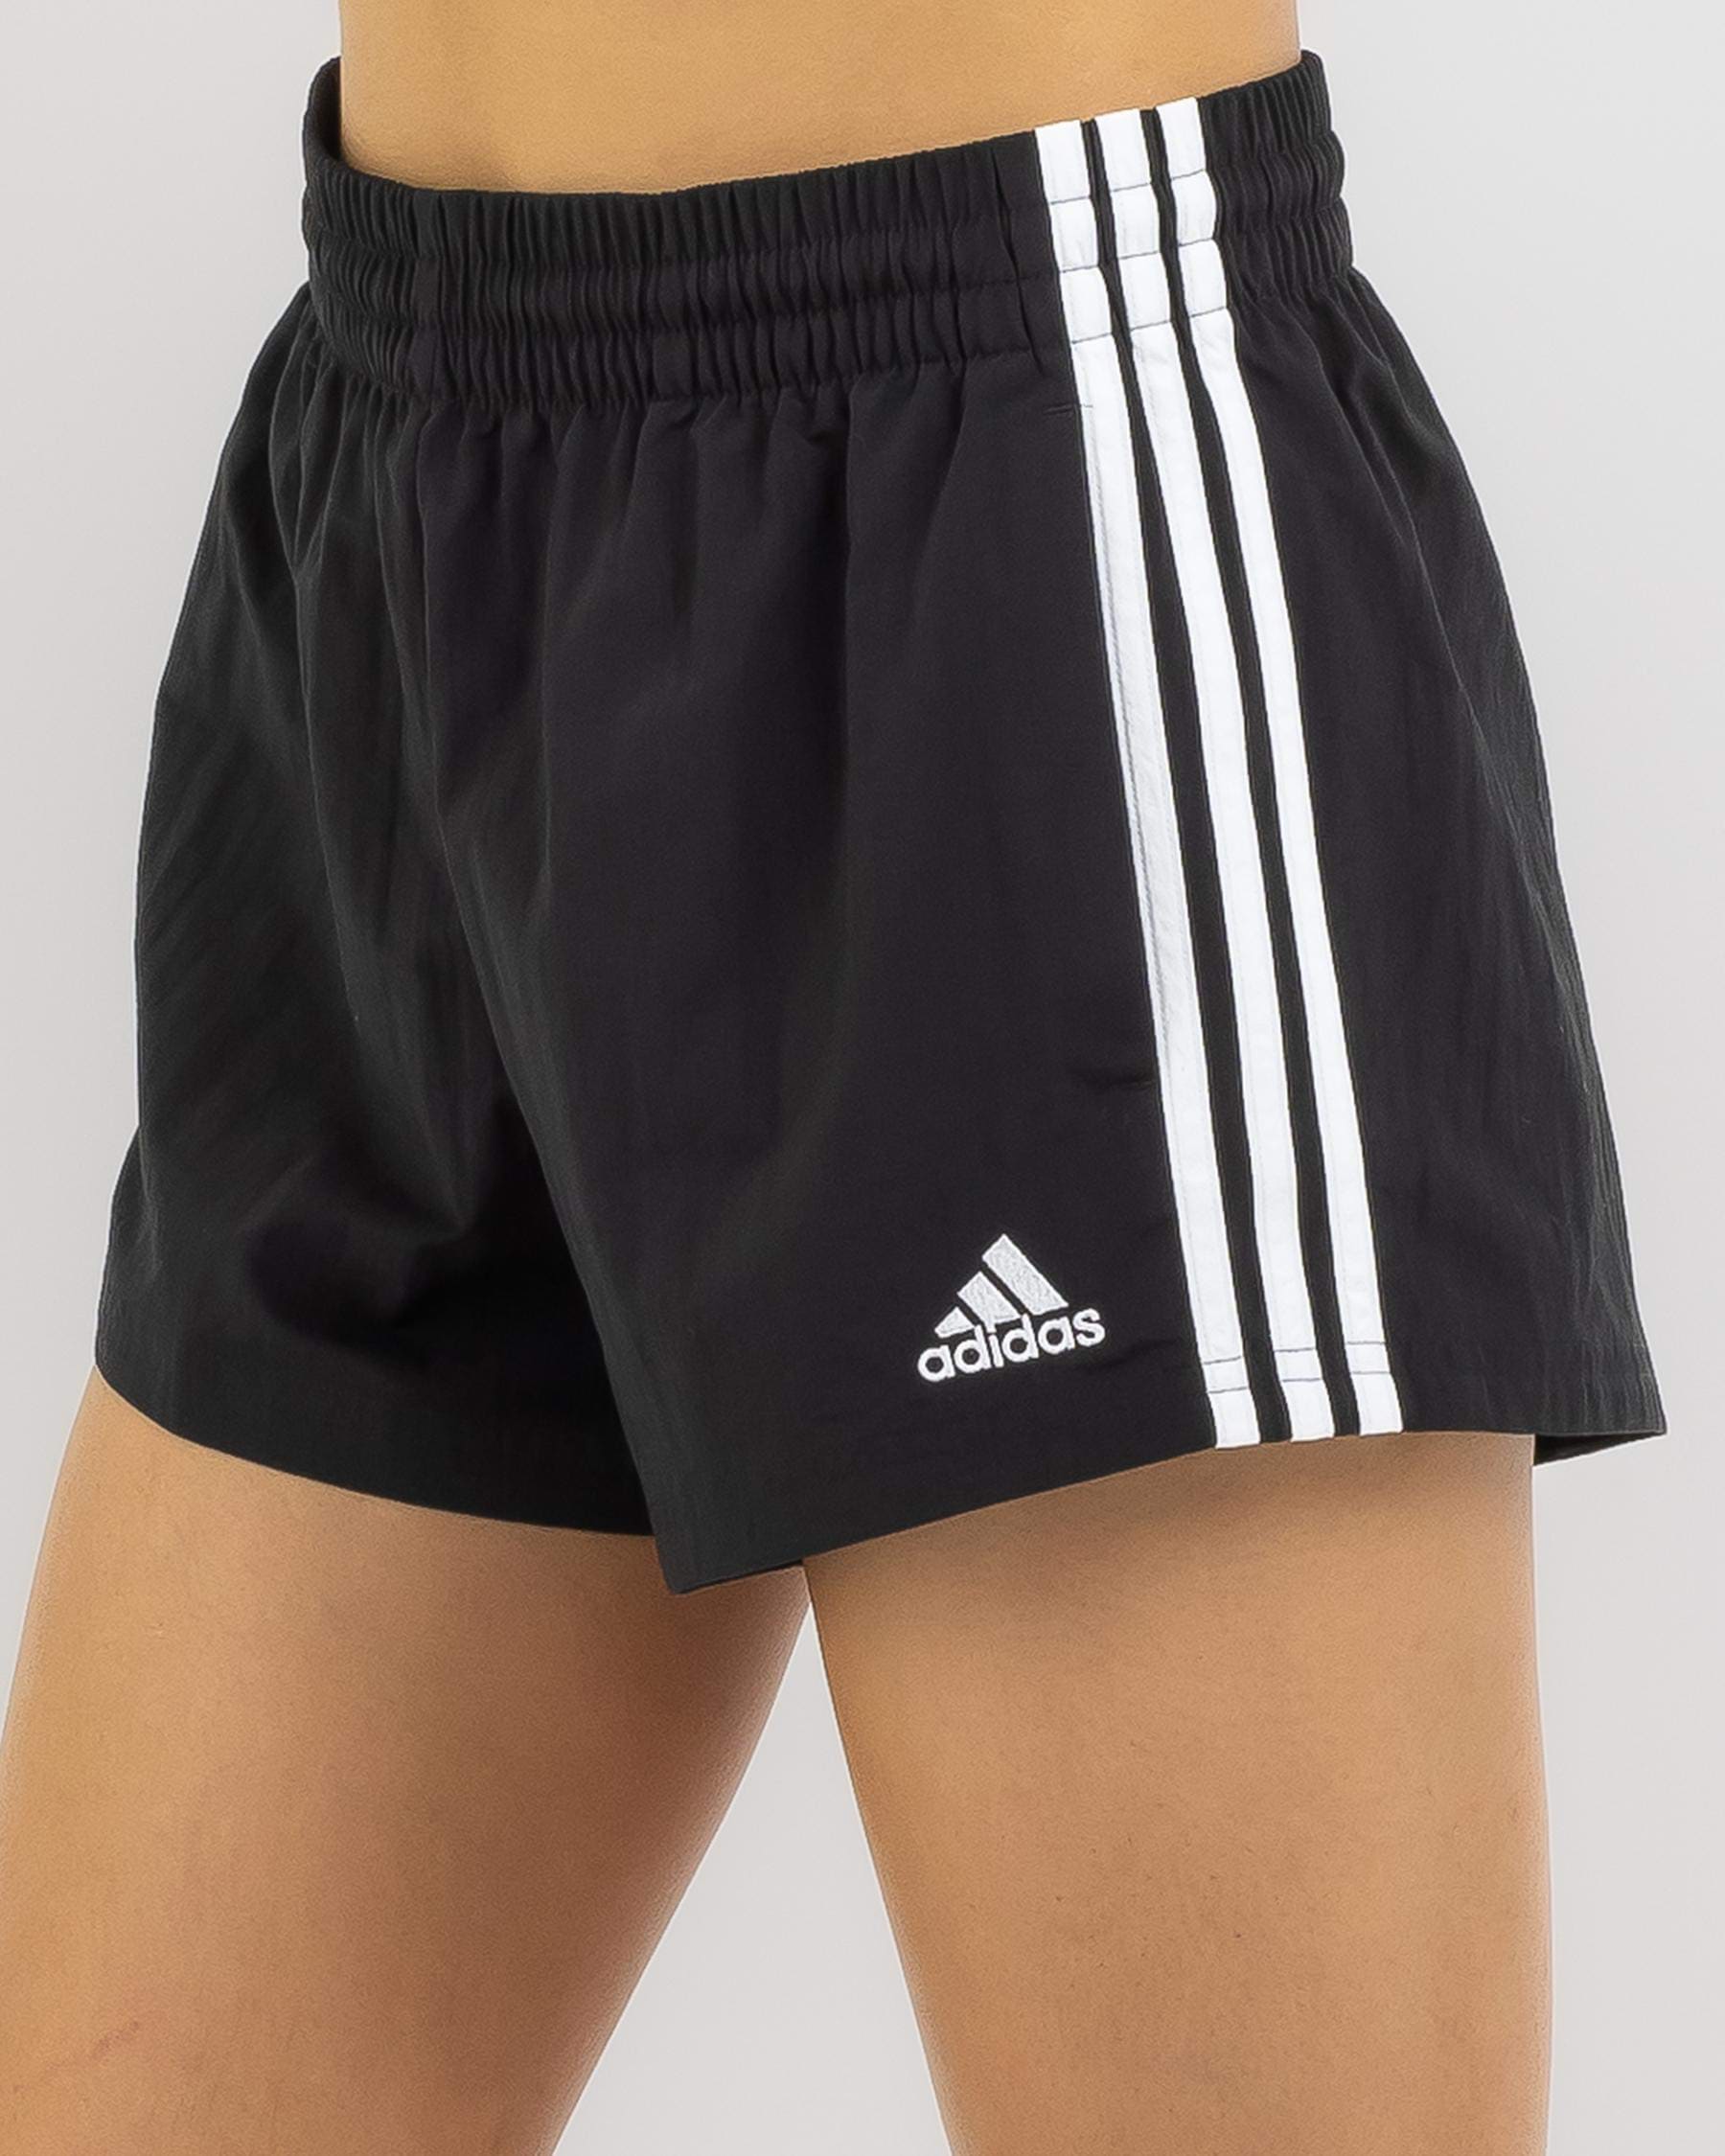 Adidas Essentials 3 Stripe Woven & Easy Shipping Beach Shorts States Returns FREE* Black/white United - - City In